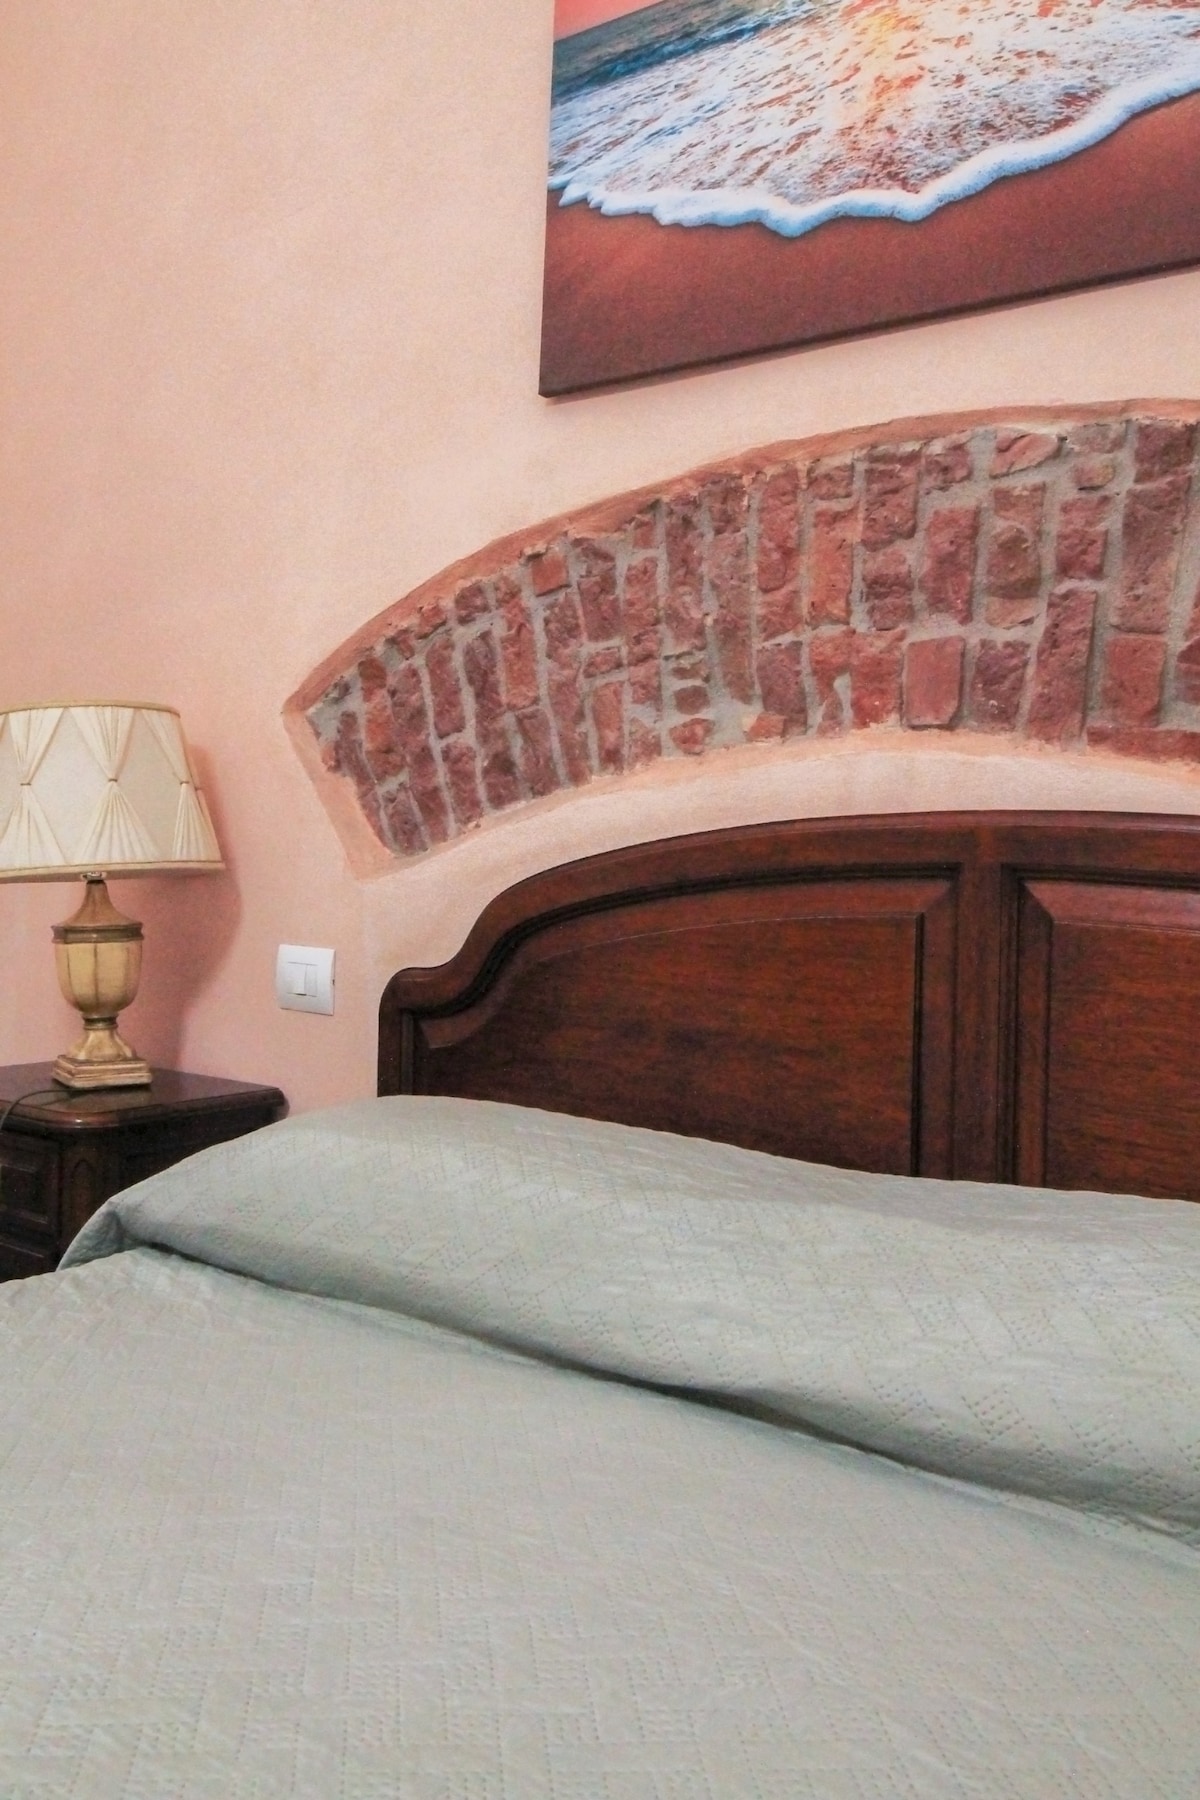 Flat in Grosseto 15 minutes from the Sea